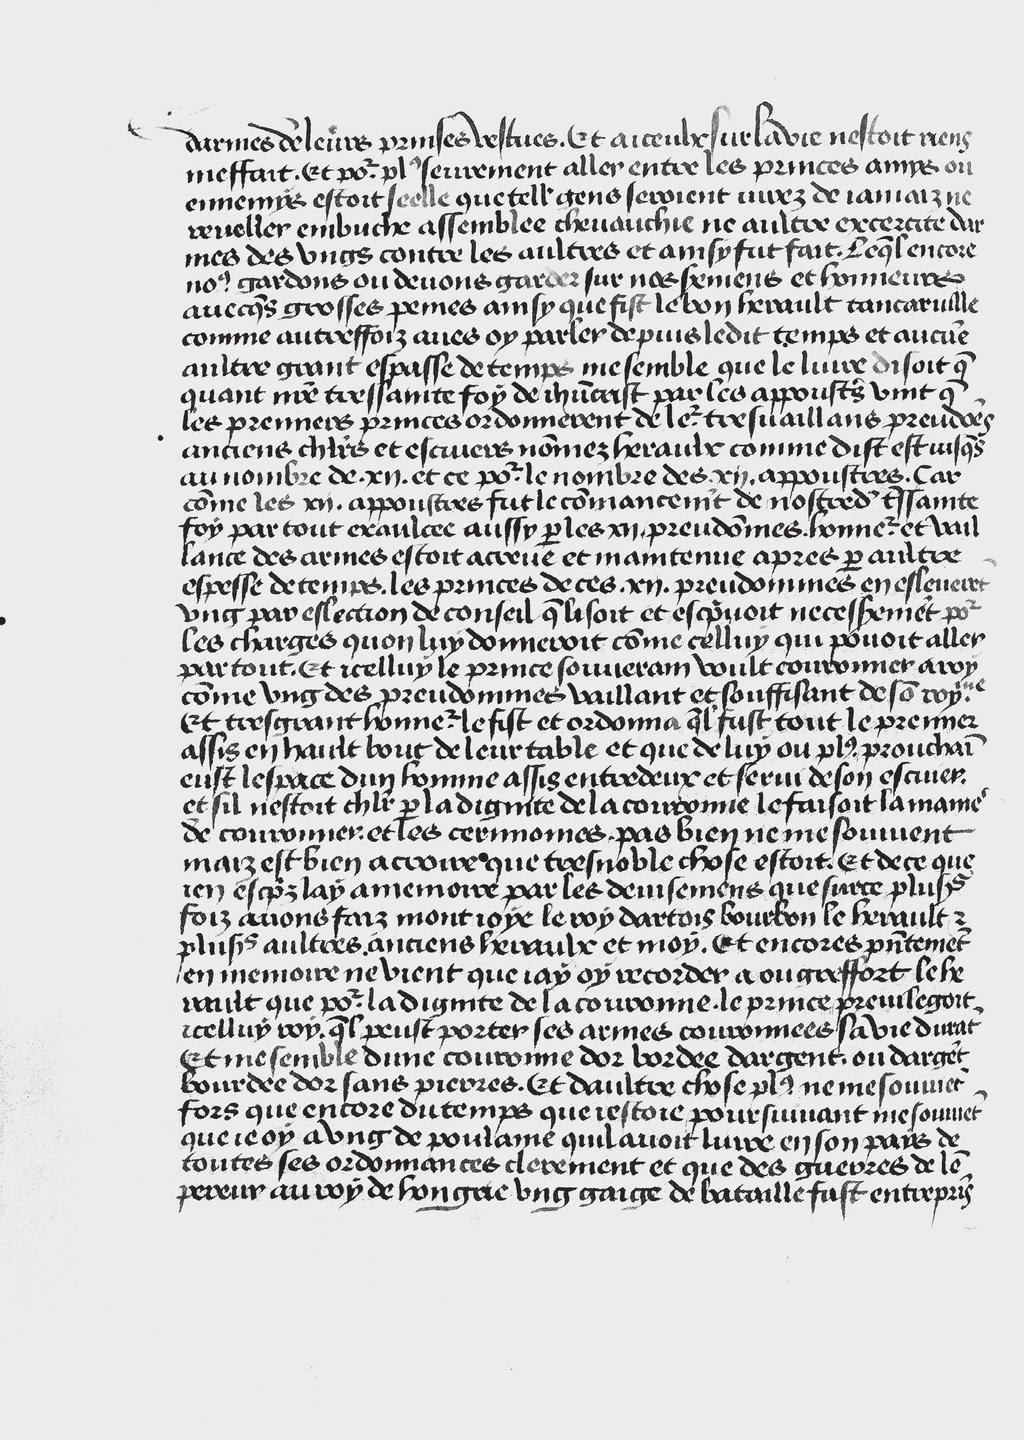 An Early 15th Century Letter by Nicholas Villart 41 A page from the manuscript containing the letter by Nicholas Villart of 1407, at the bottom of